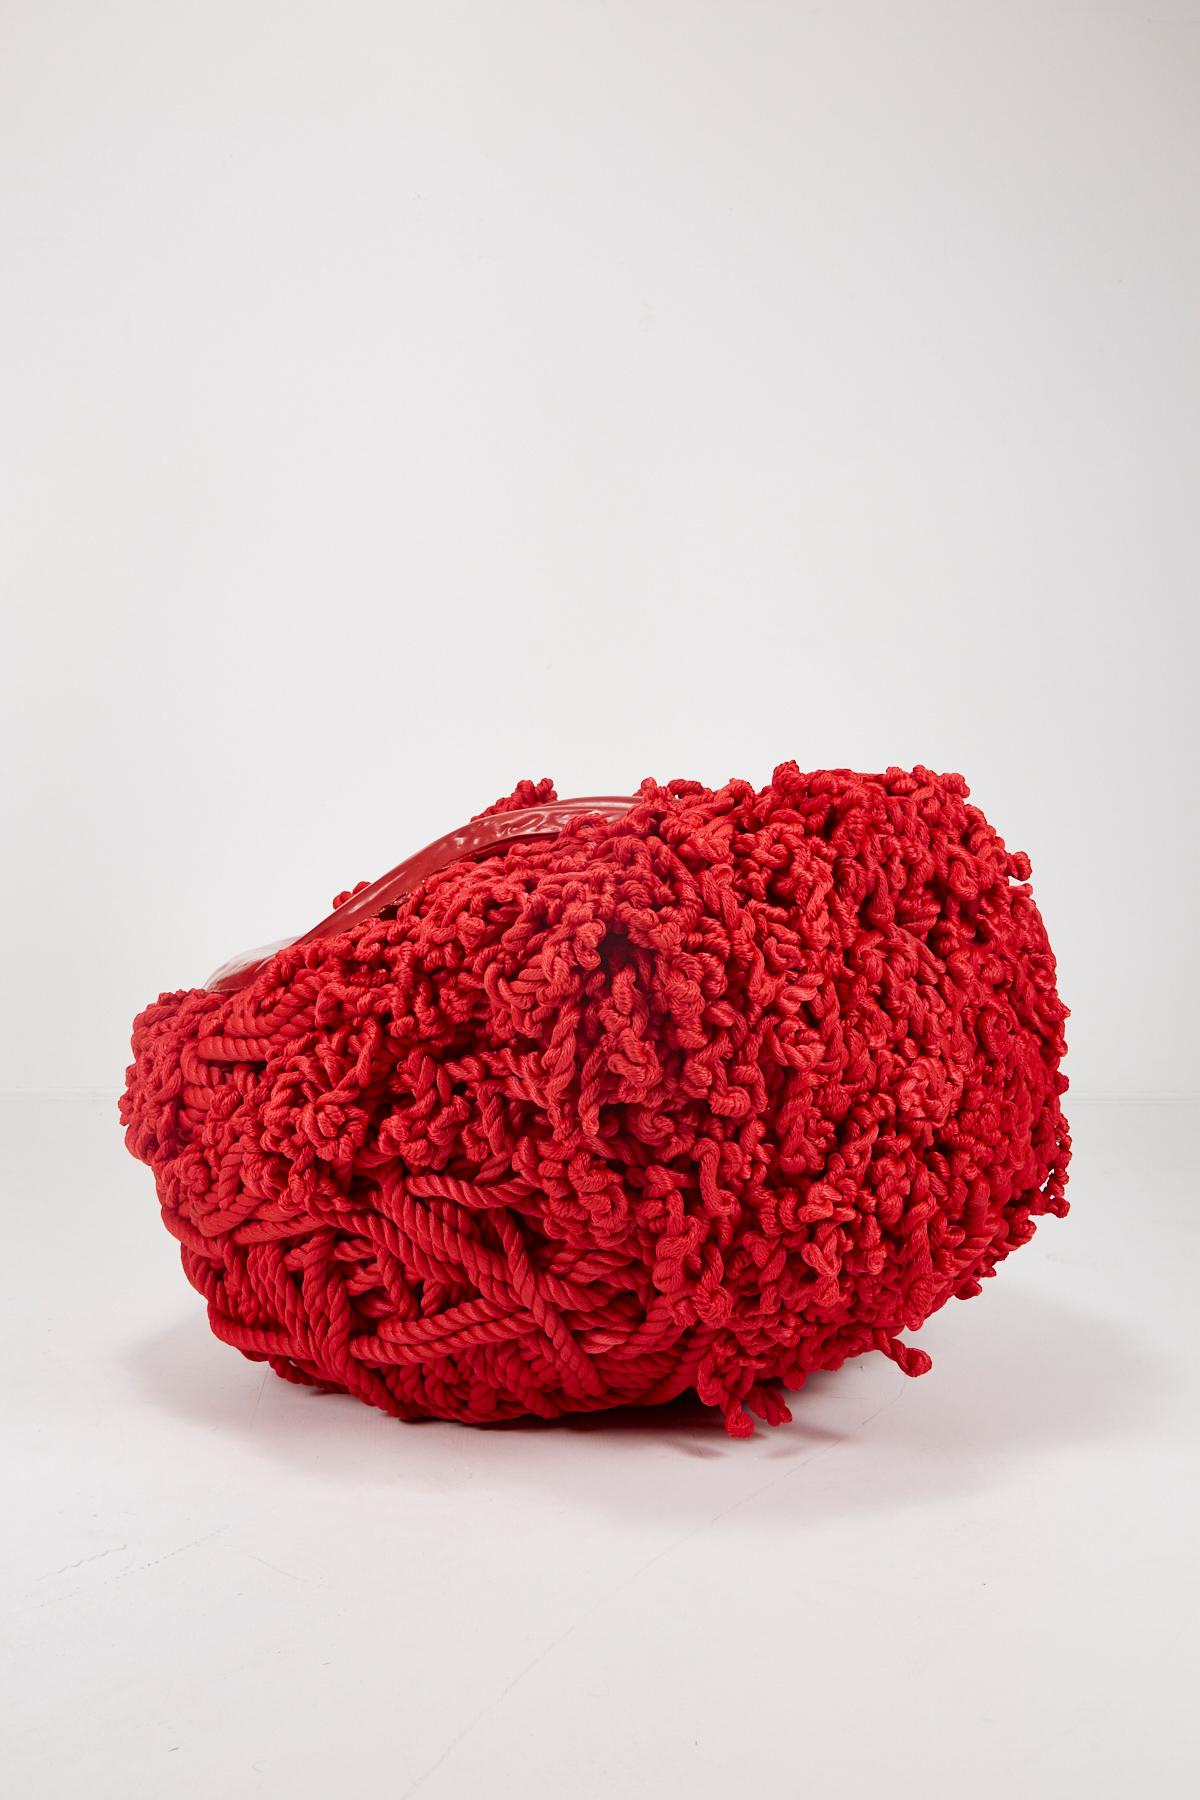 Meltdown Chair Pp Rope Red by Tom Price, 2017 3